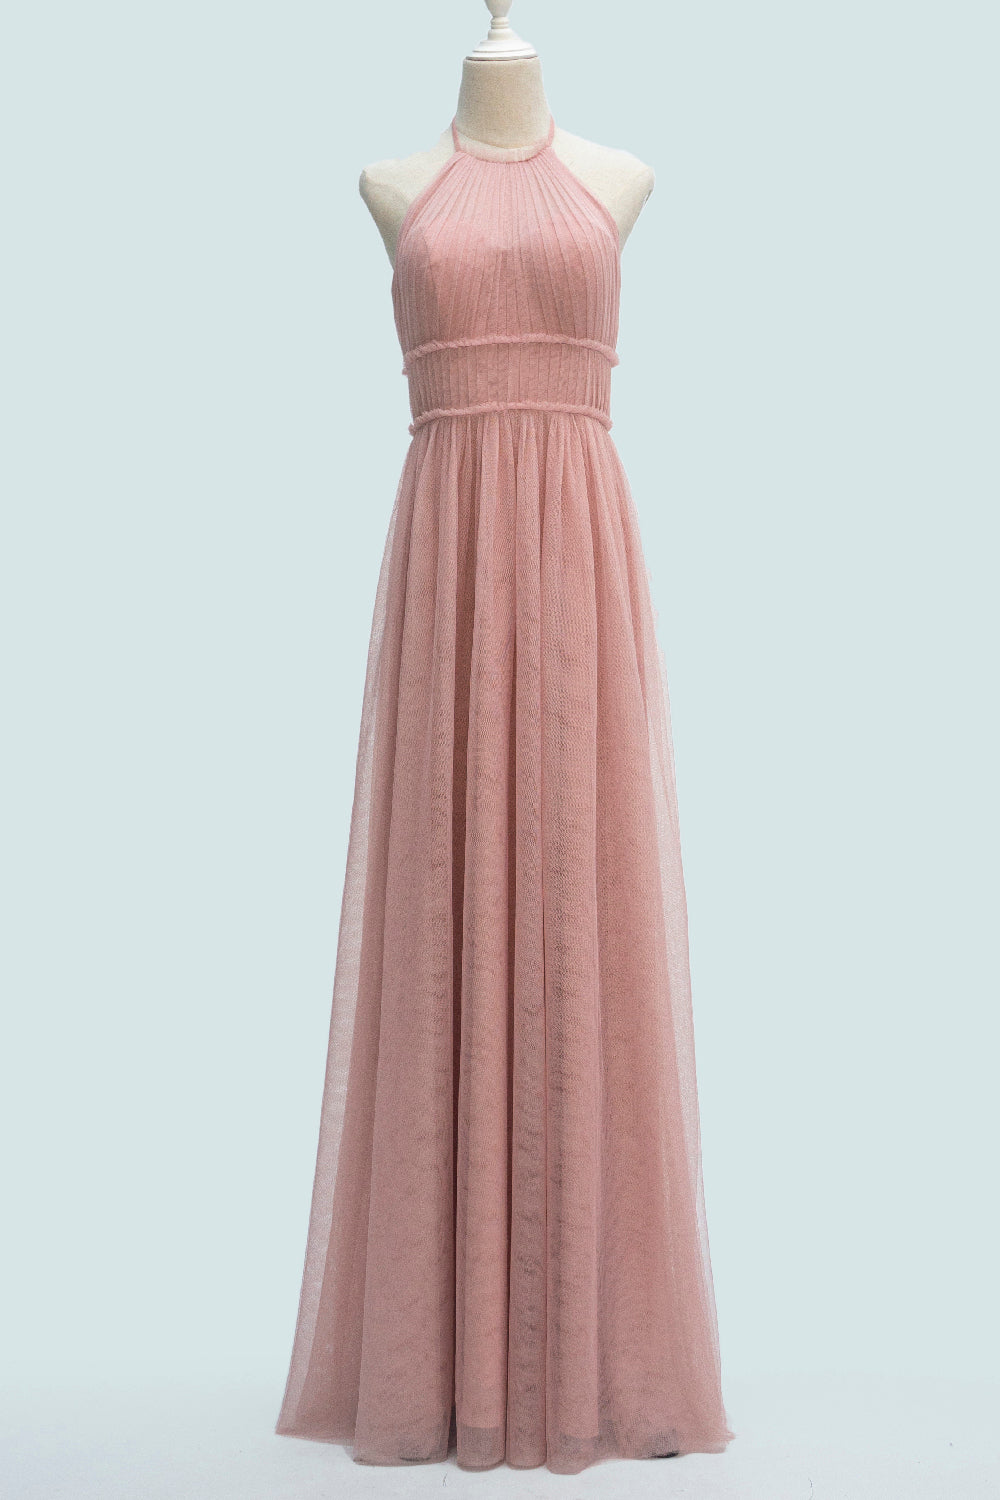 Blushing Pink A-line Halter Pleated Backless Long Bridesmaid Dress